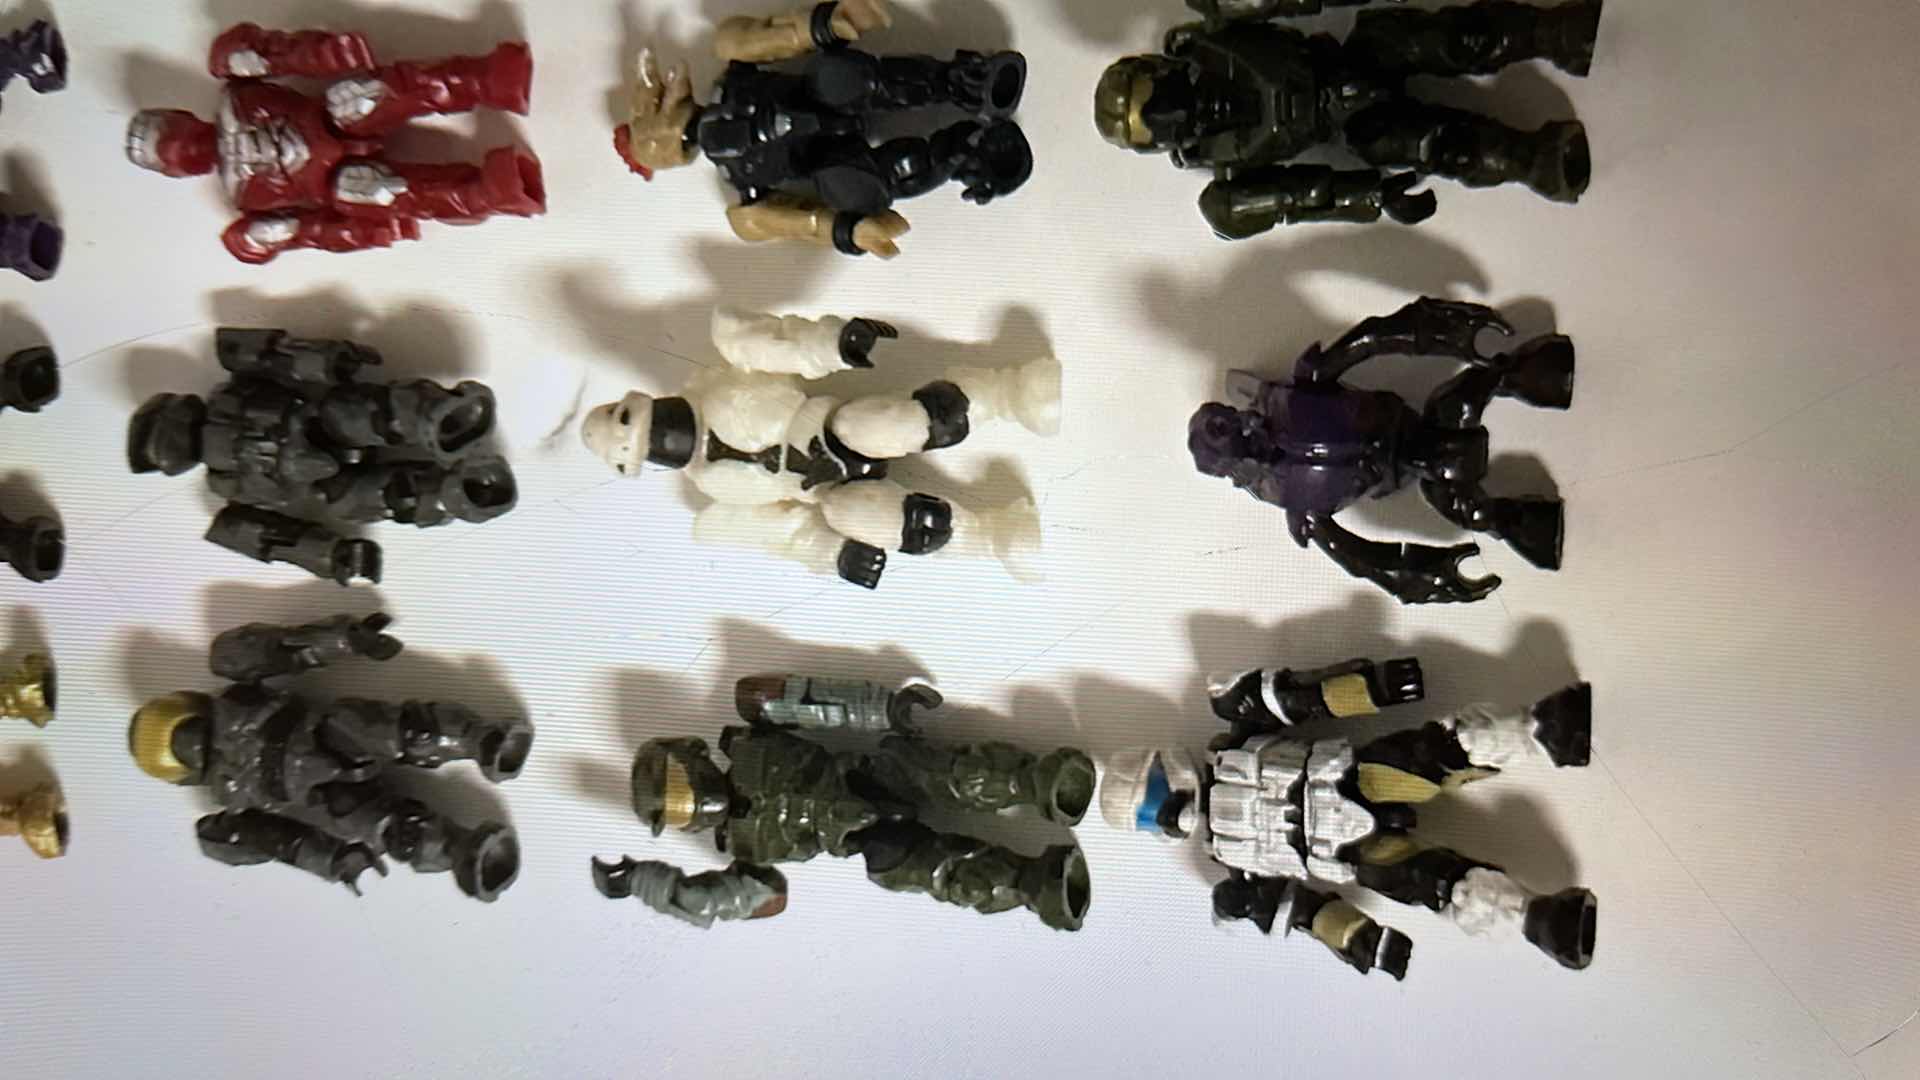 Photo 5 of HALO COLLECTABLES FIGURINES